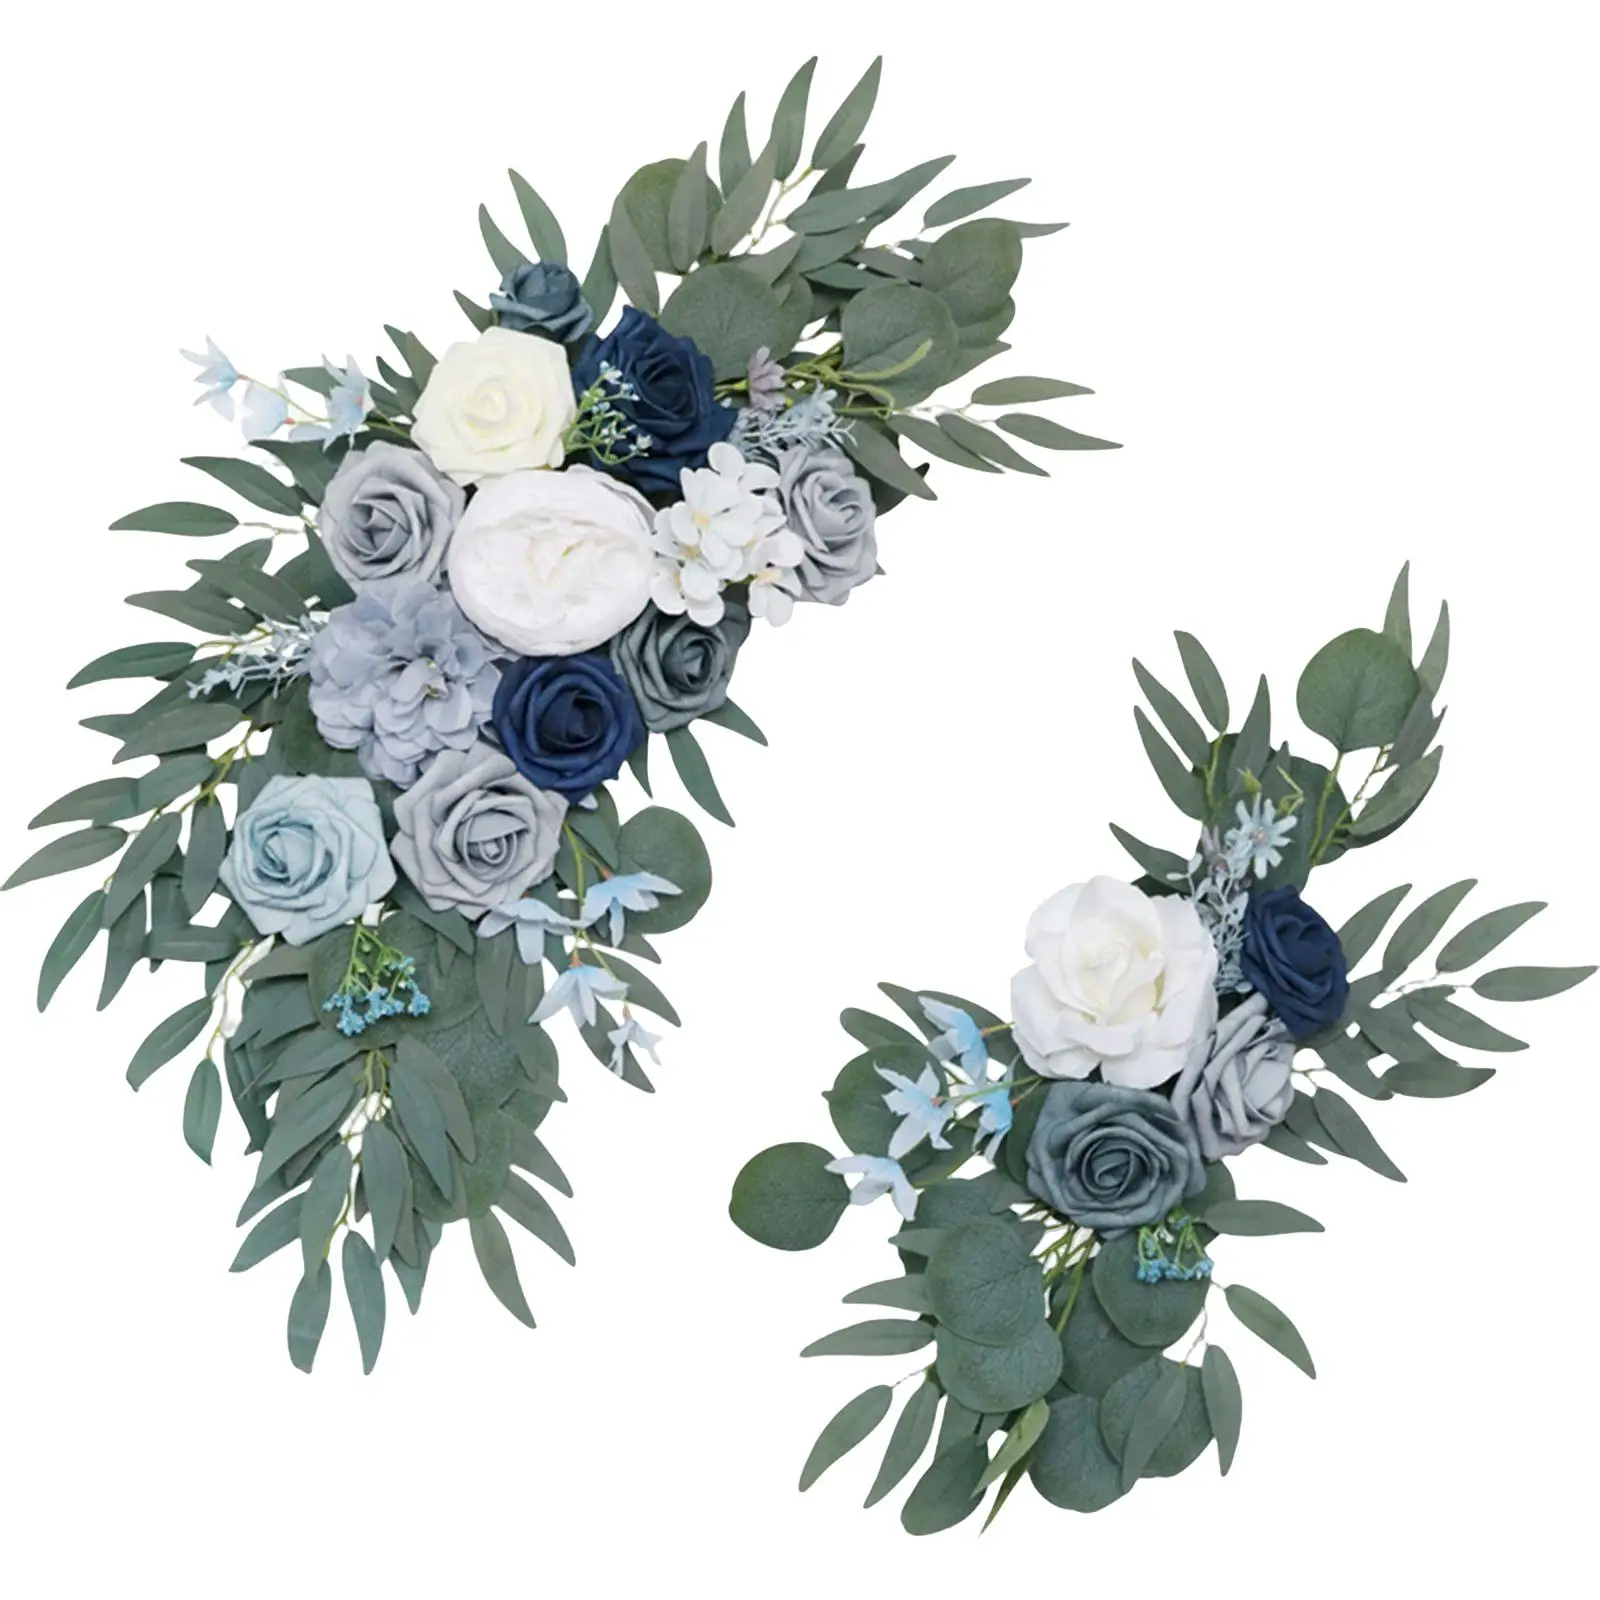 2 Pieces Artificial Rose Flower Swag Floral Arrangement Centerpiece Wedding Arch Flowers for Ceremony Backdrop Wedding Wall Home